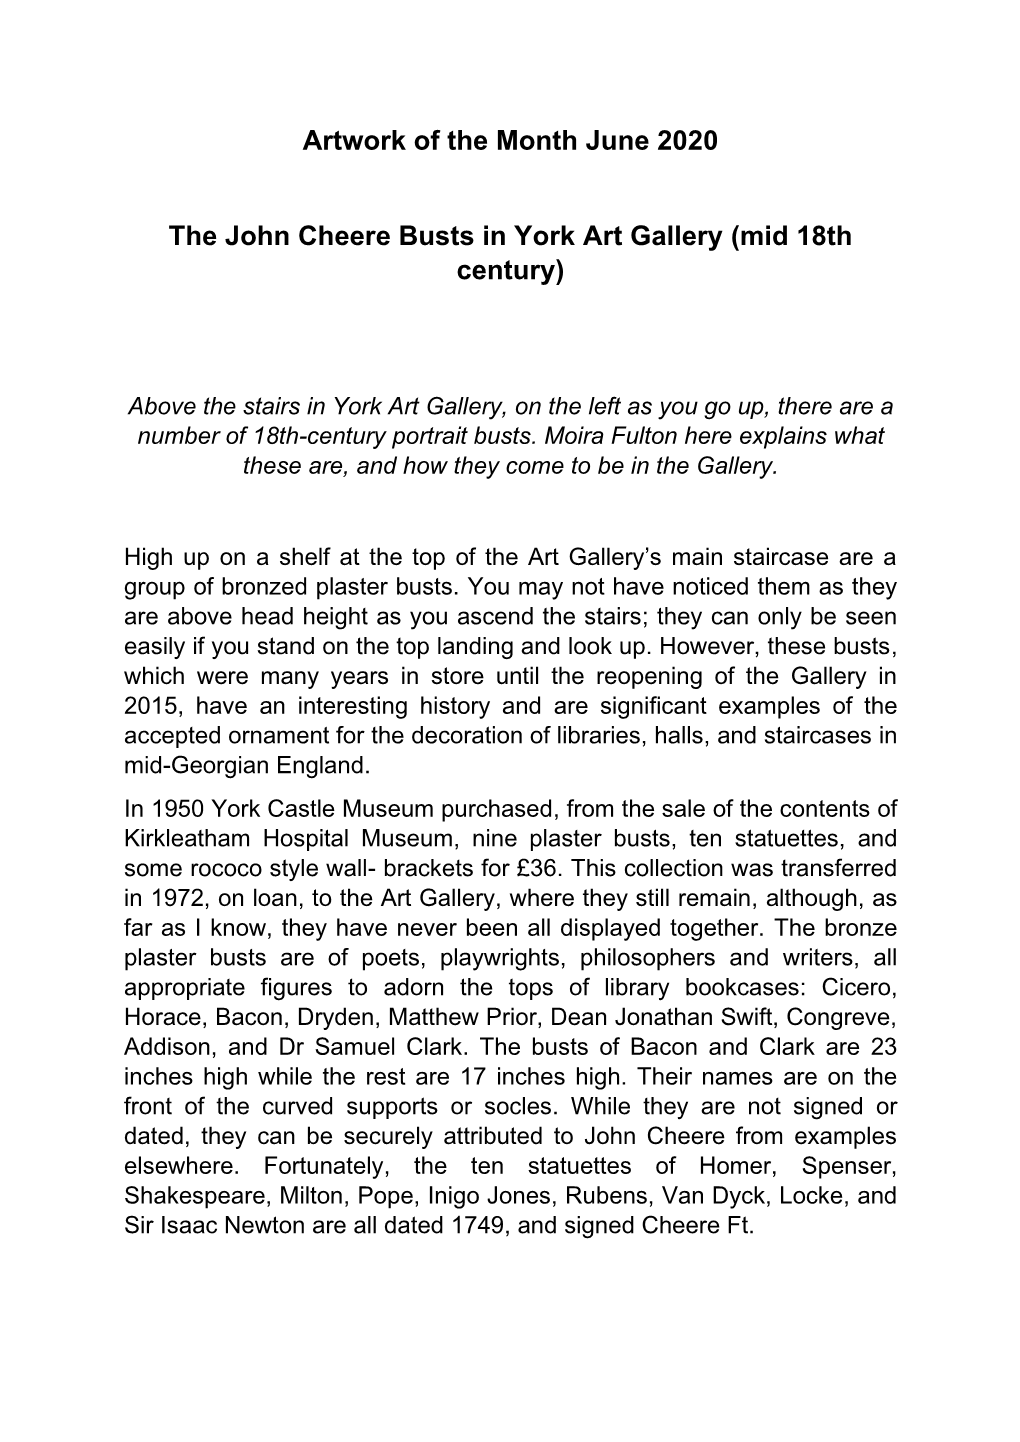 Artwork of the Month June 2020 the John Cheere Busts in York Art Gallery